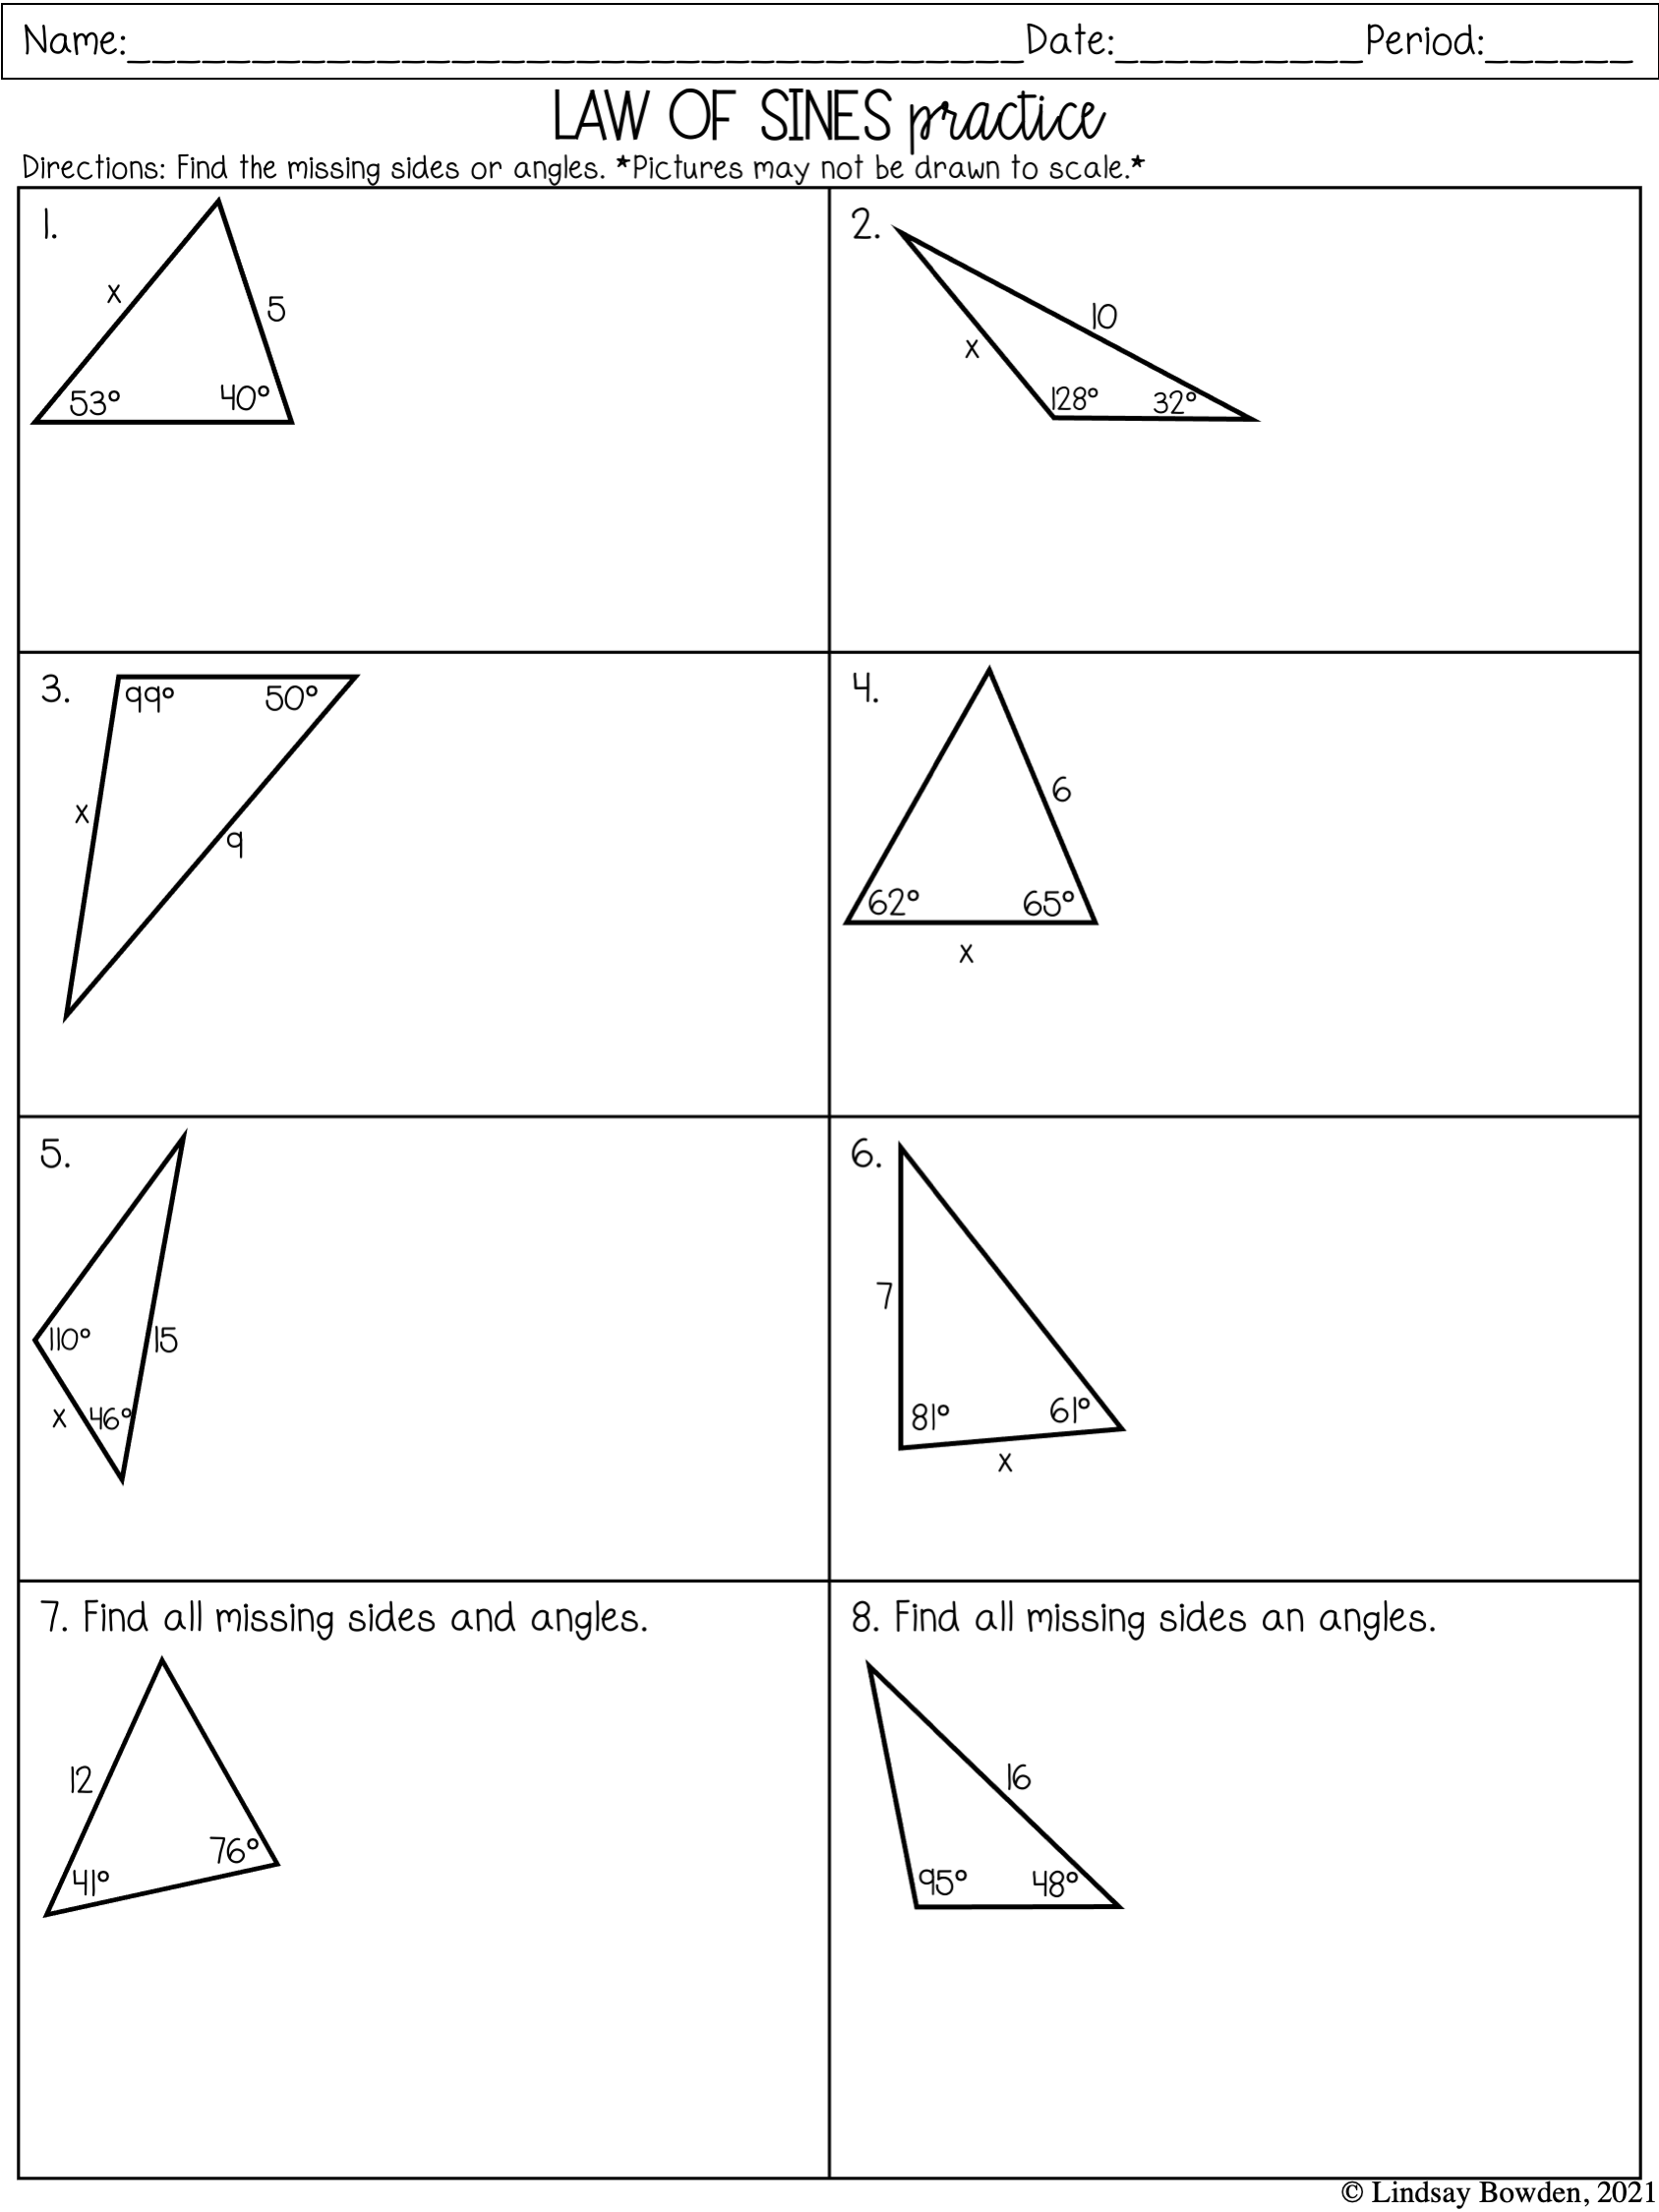 Law of Sines and Cosines Notes and Worksheets - Lindsay Bowden Regarding Law Of Sines Worksheet